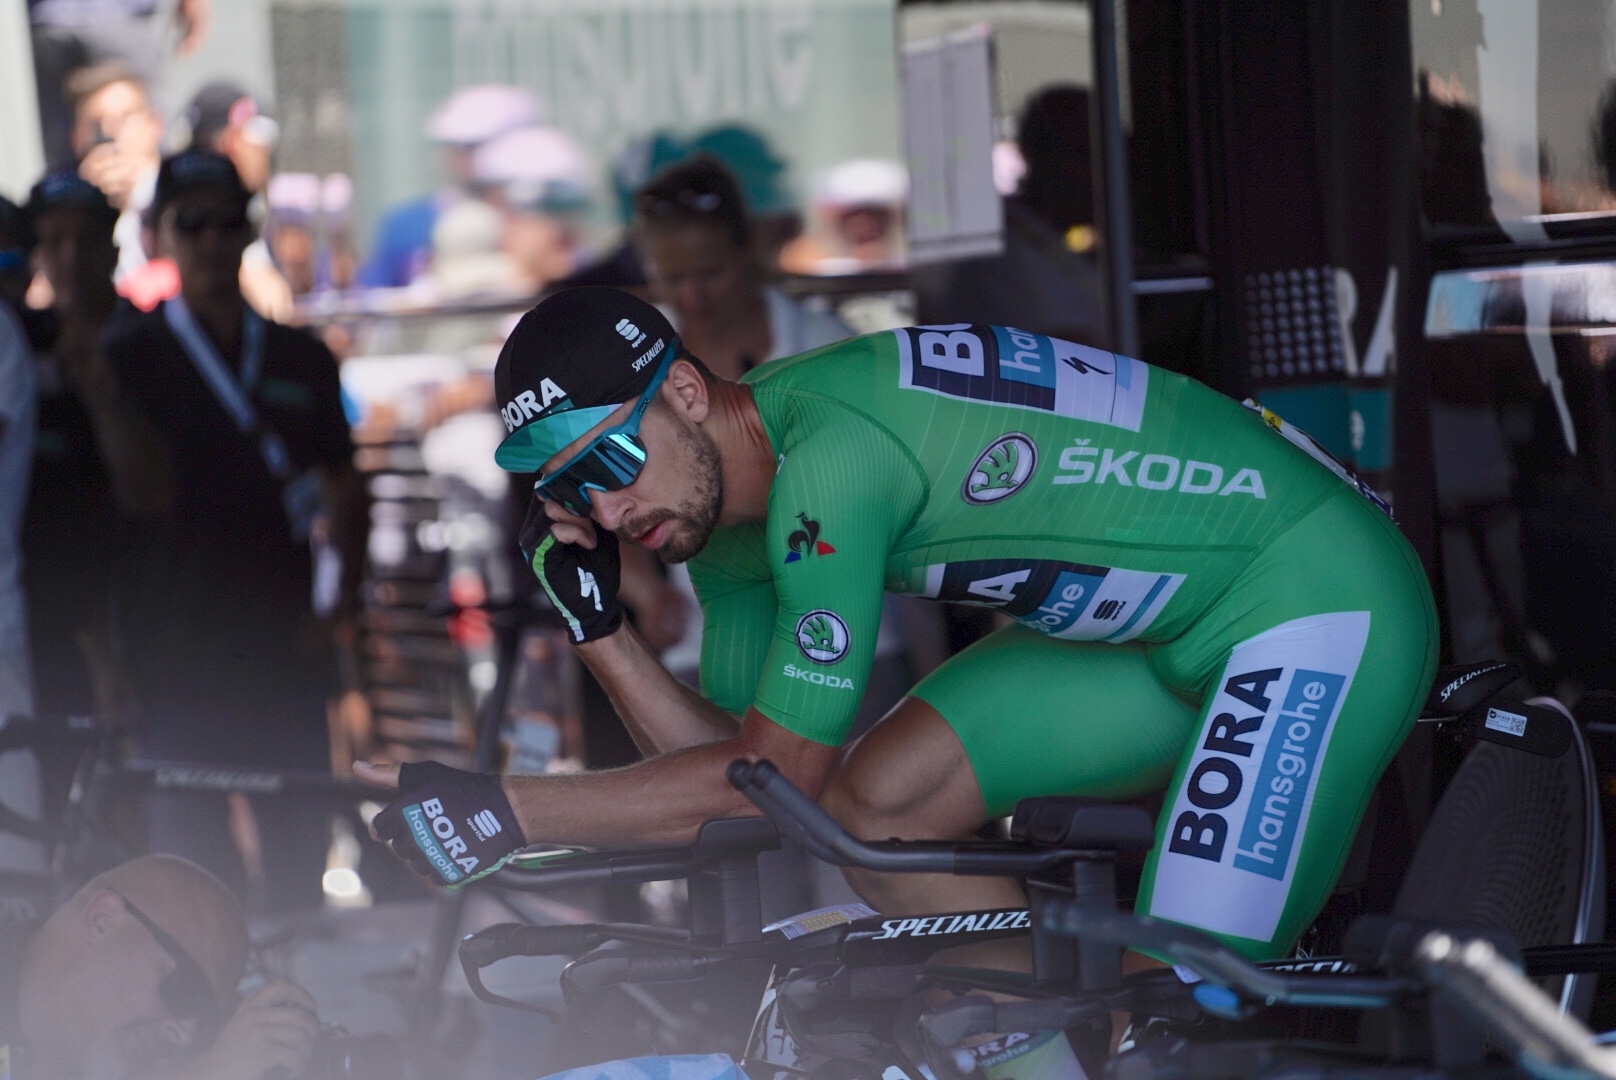 Peter Sagan warms up in Green yet again